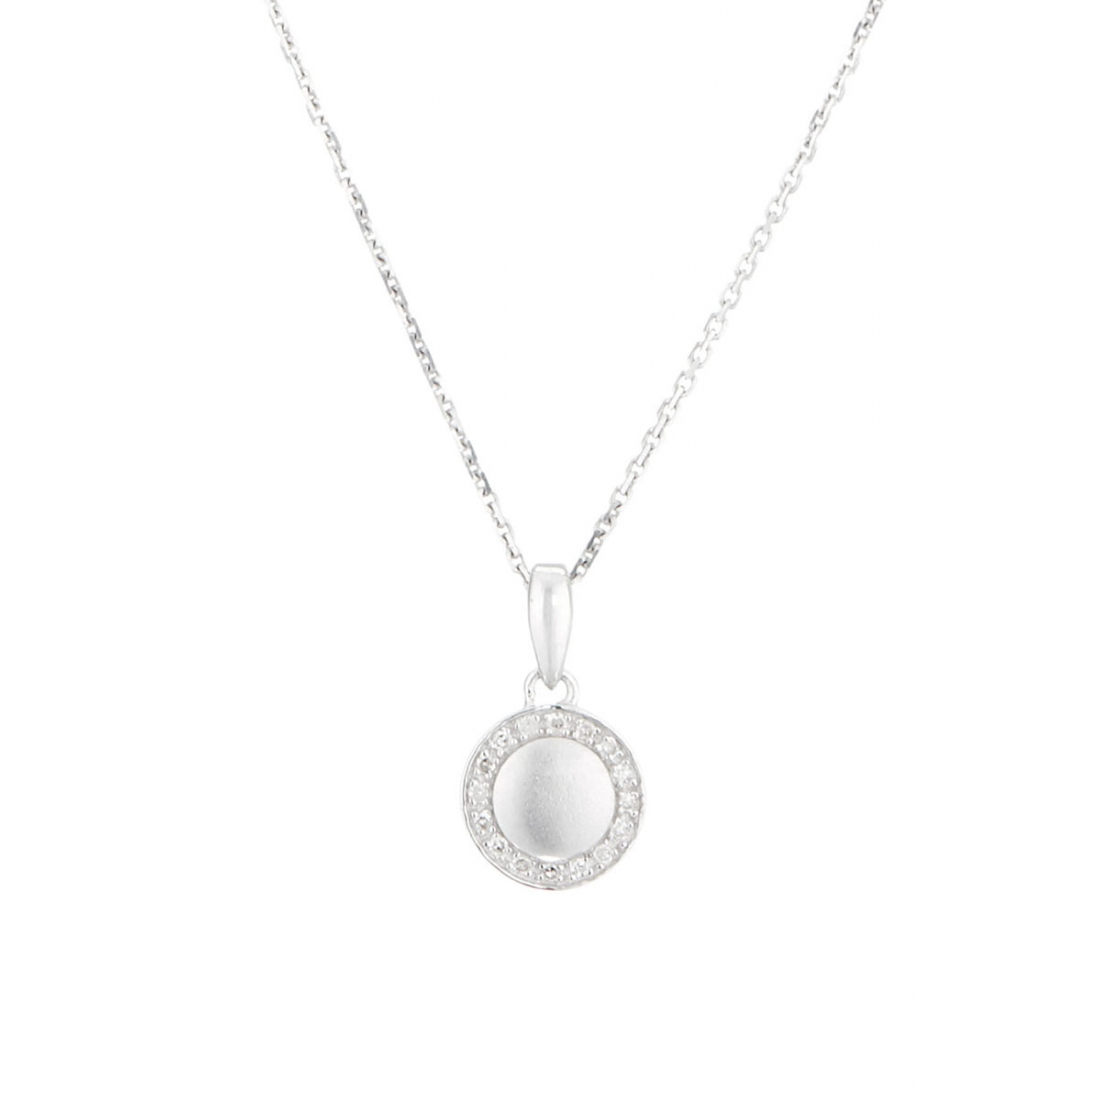 Women's 'Bergame' Pendant with chain